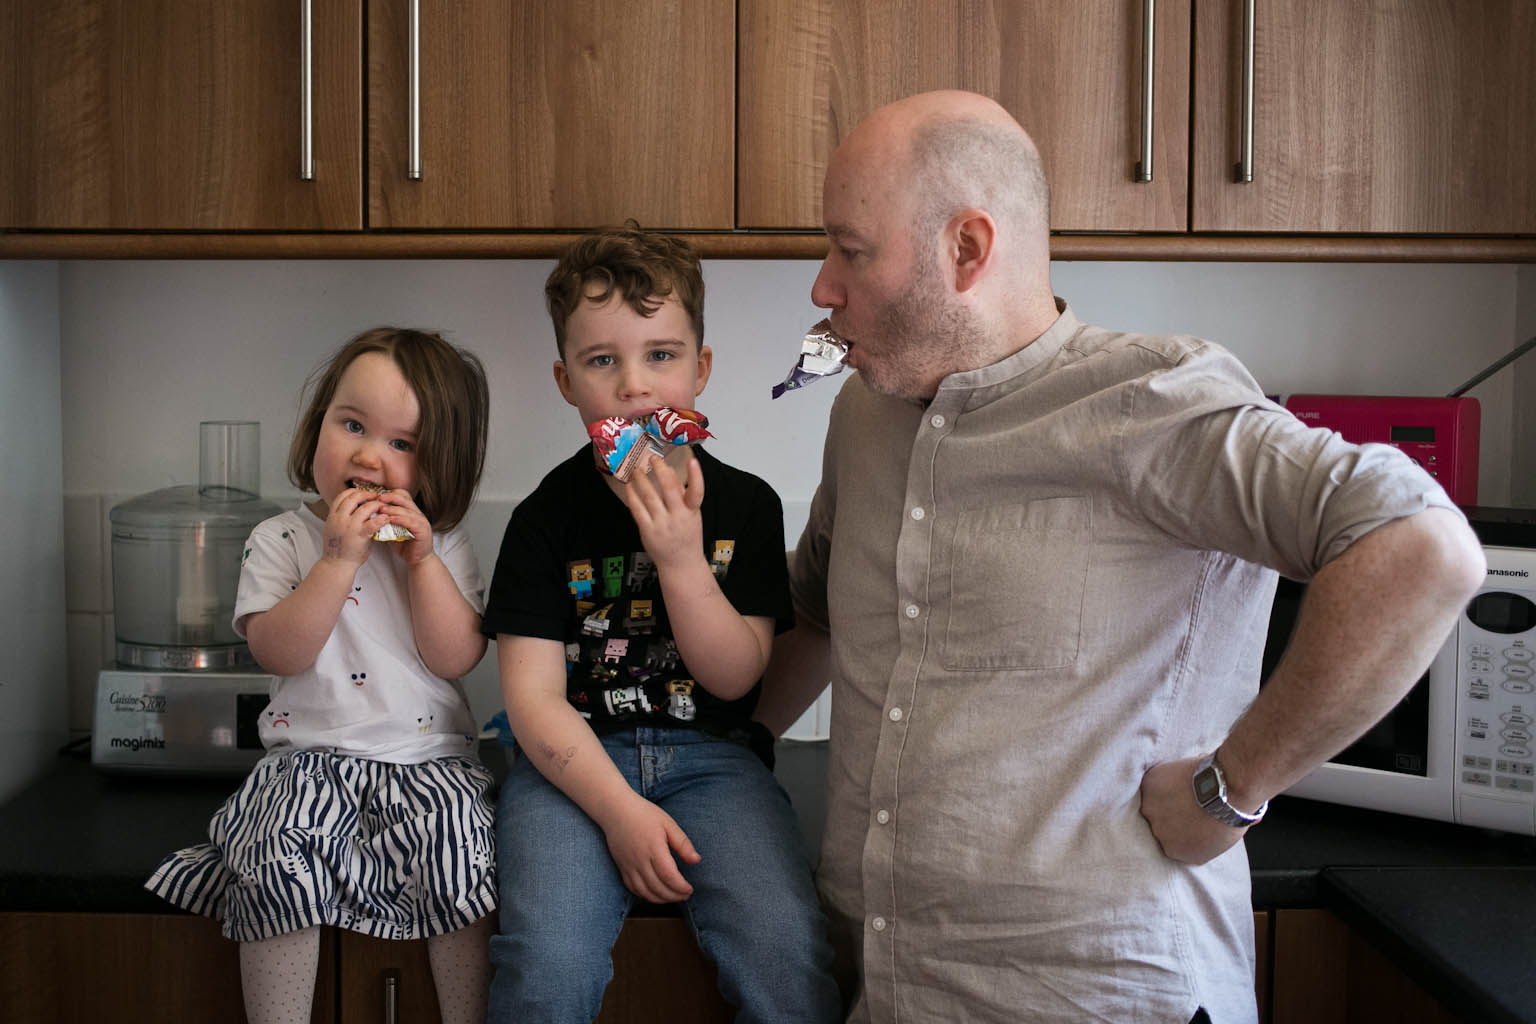 Siblings eating snack bars looking to camera while dad jokes with snack bar in mouth